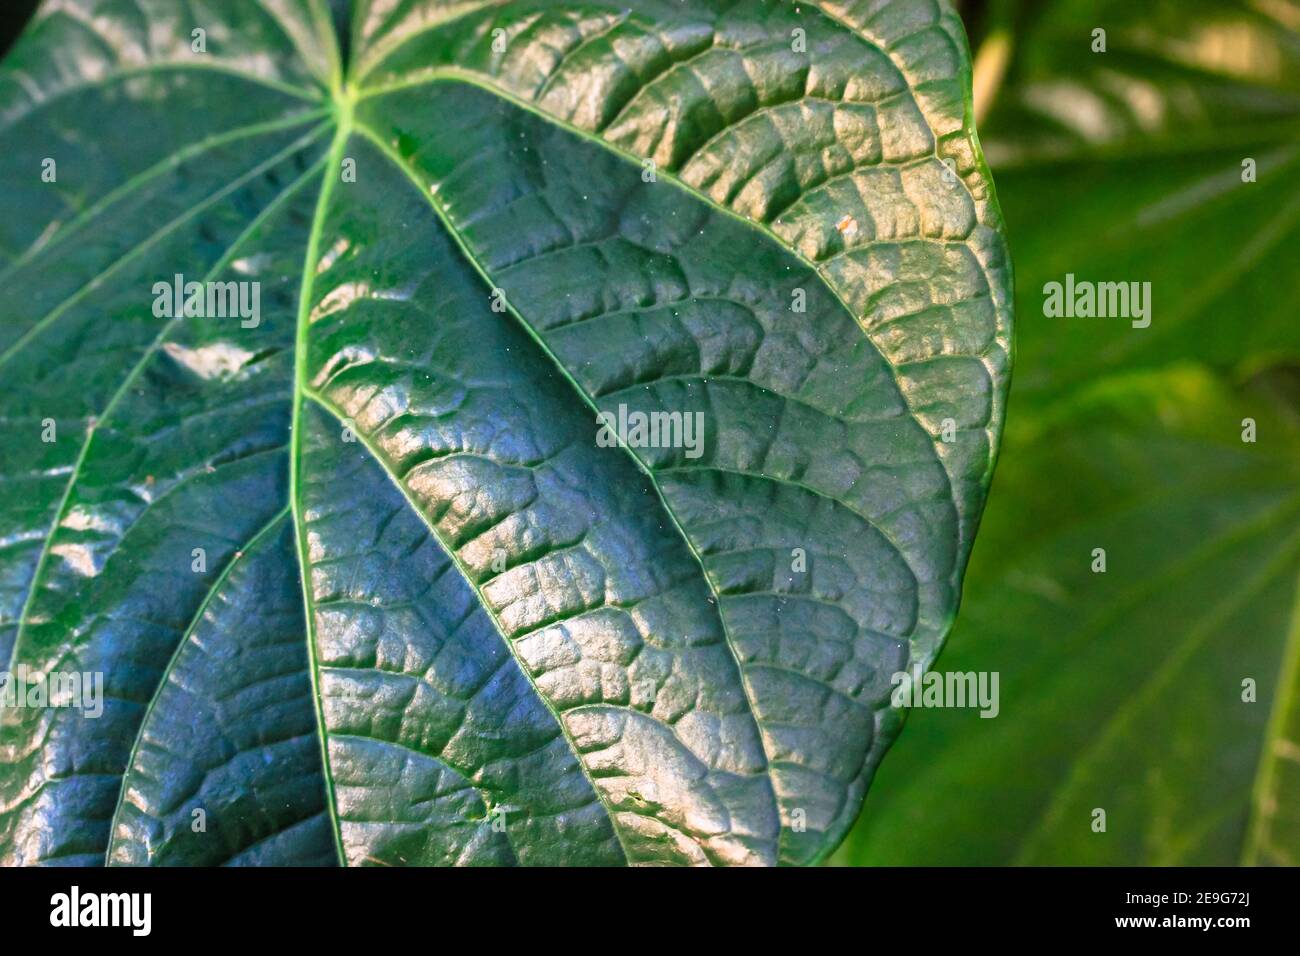 Pattern and texture of tropical leaves close-up. Large leaf, nature background. Jungle, botanical garden or greenhouse. Plant care. High quality photo Stock Photo